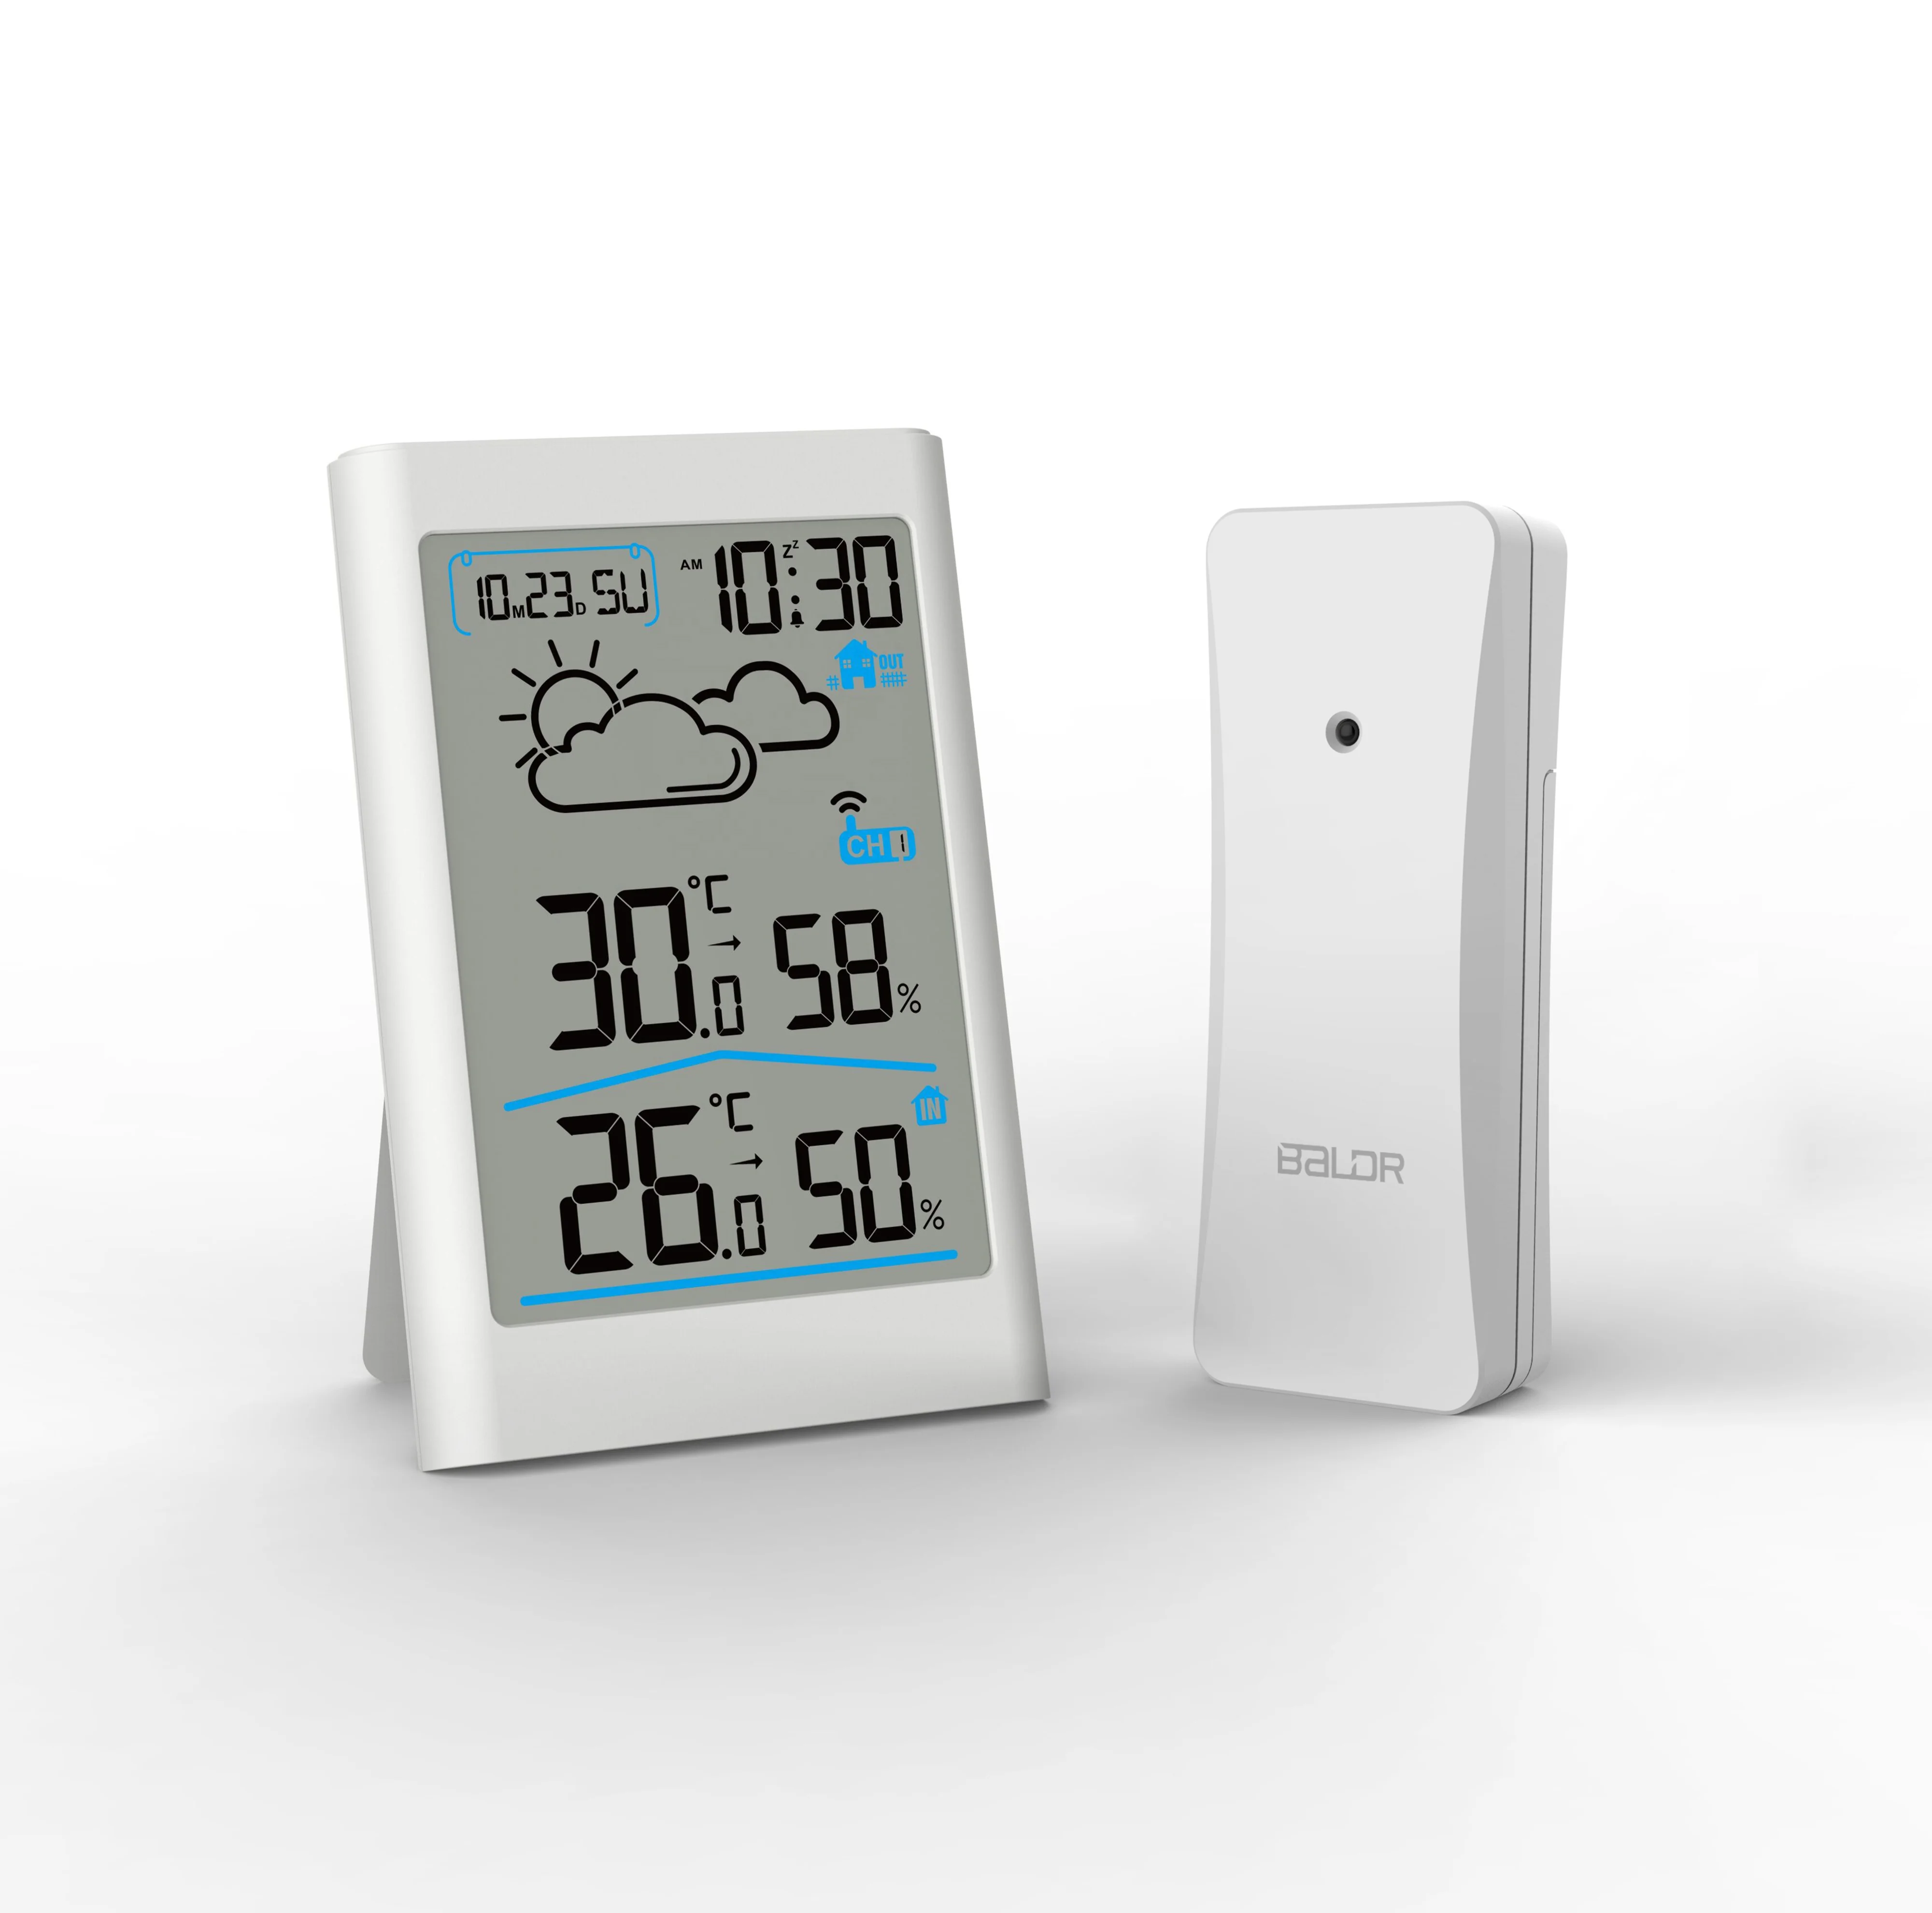 

BALDR B0341 Digital Wireless Indoor/outdoor Weather Station Thermometer Hygrometer Temperature Humidity Monitor Wetterstation